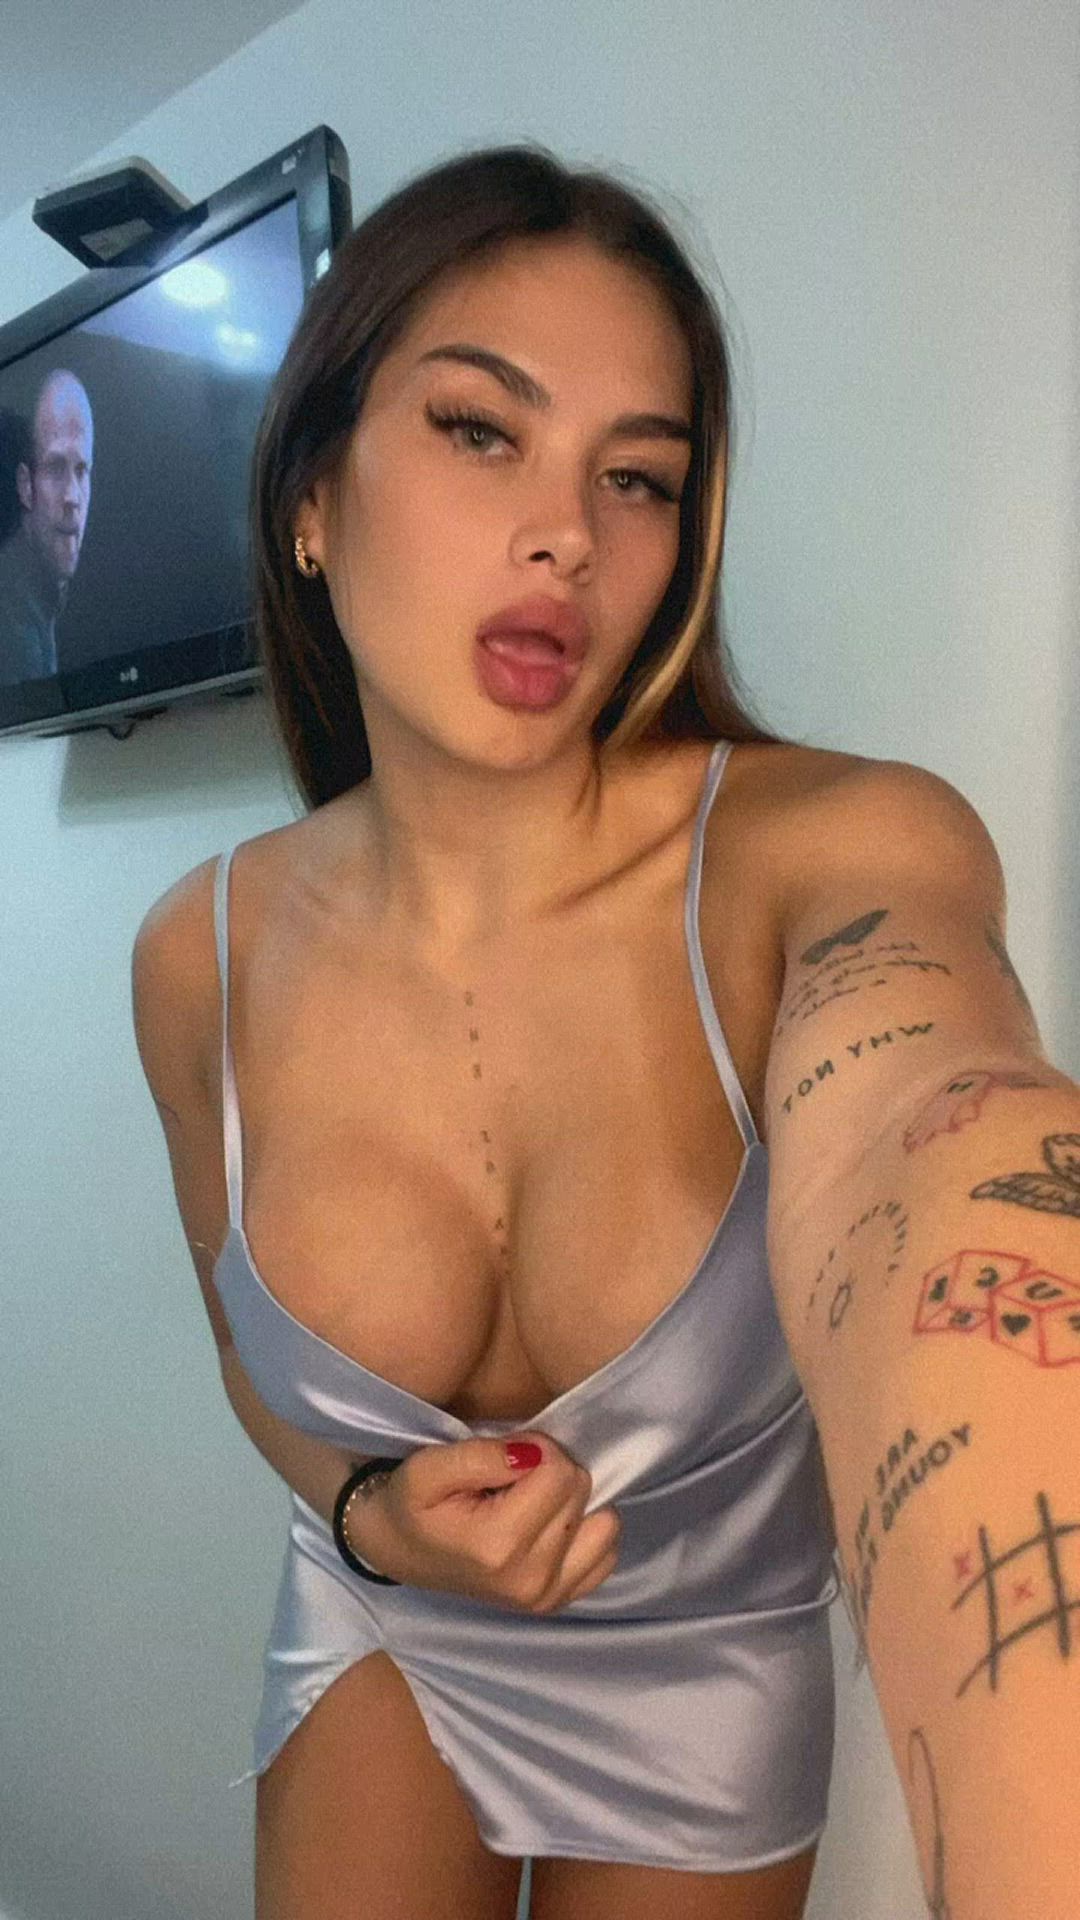 Big Tits porn video with onlyfans model stfuwu <strong>@stefaniamejia</strong>